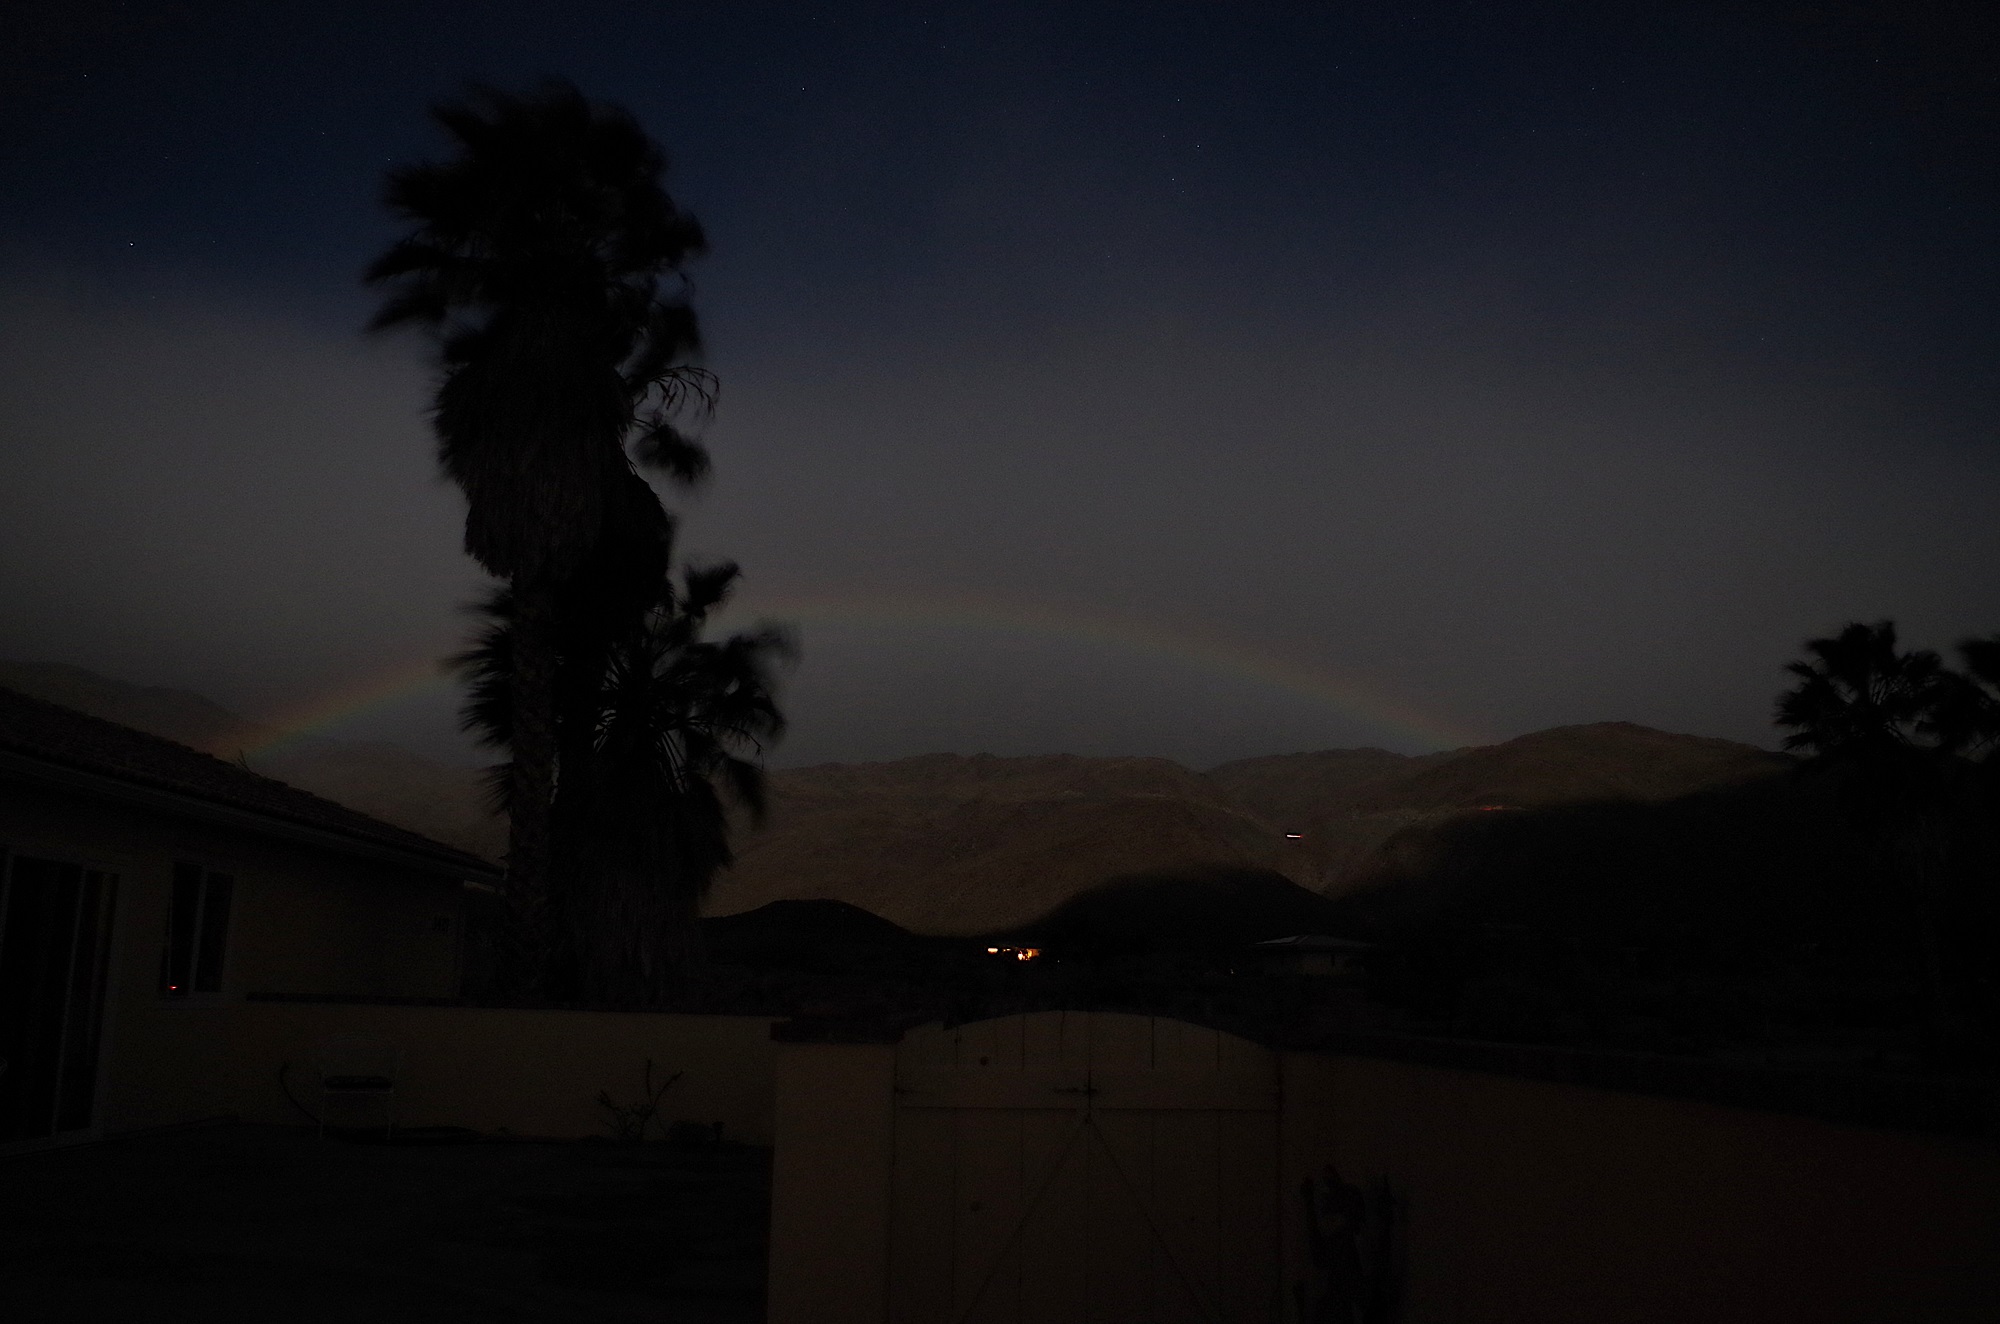 A lunar rainbow or moonbow stretching over the mountains at night in Anza-Borrego Desert State Park